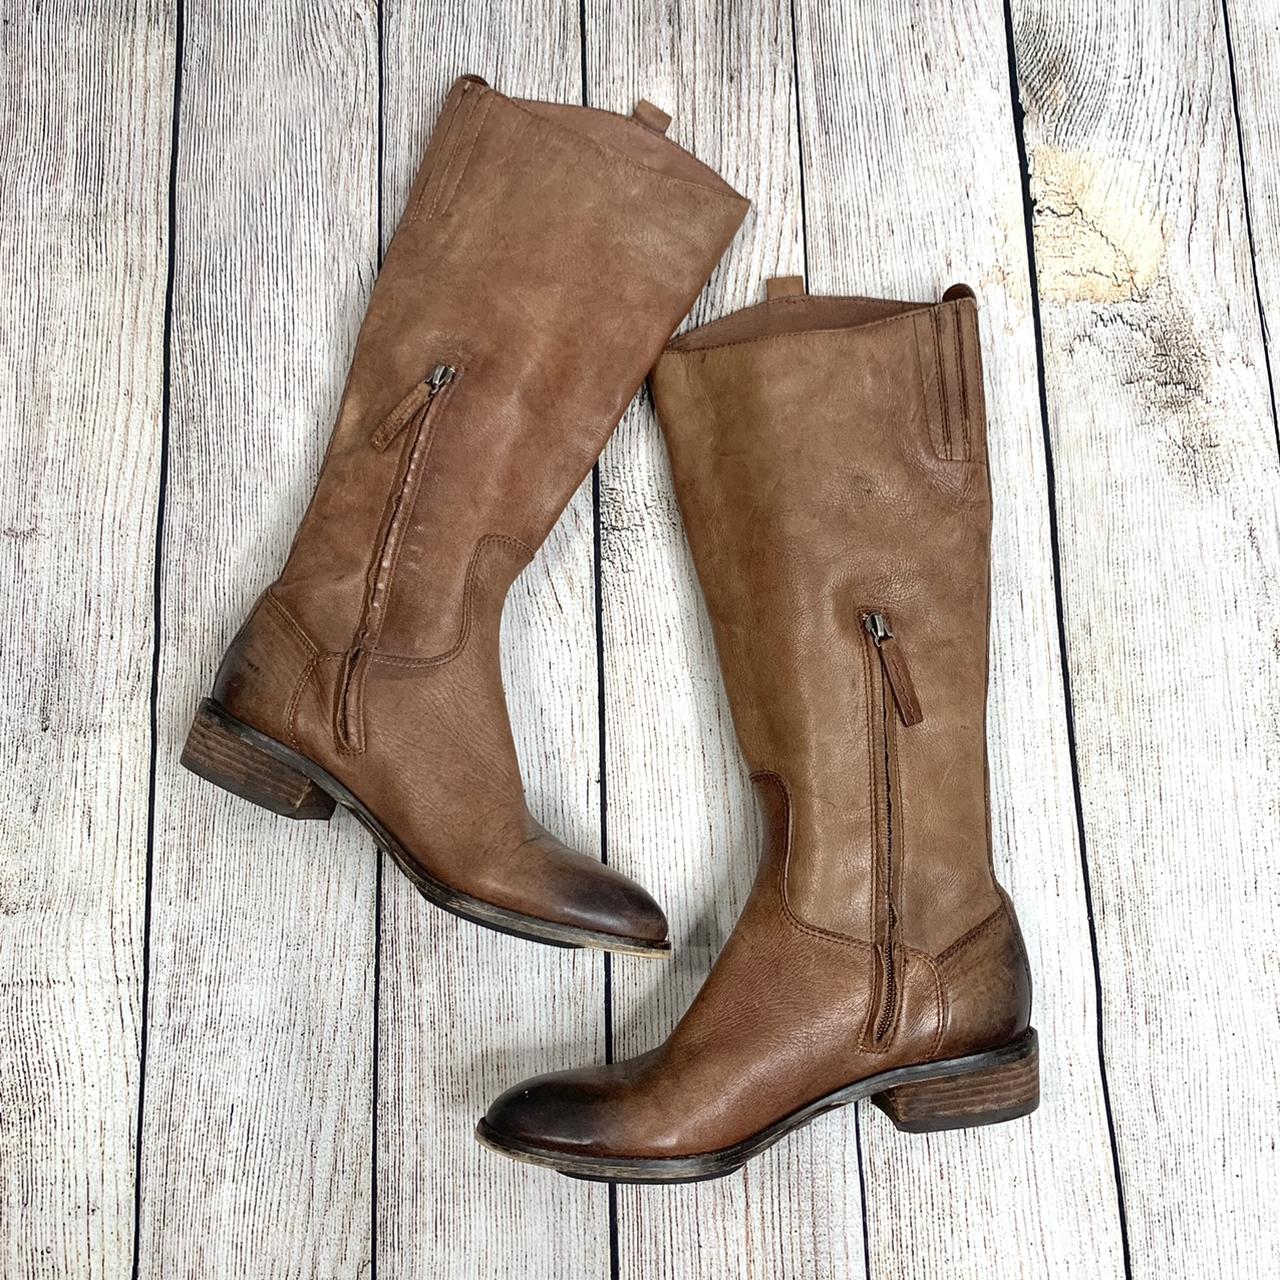 Distressed brown leather Phallon knee high boots... - Depop